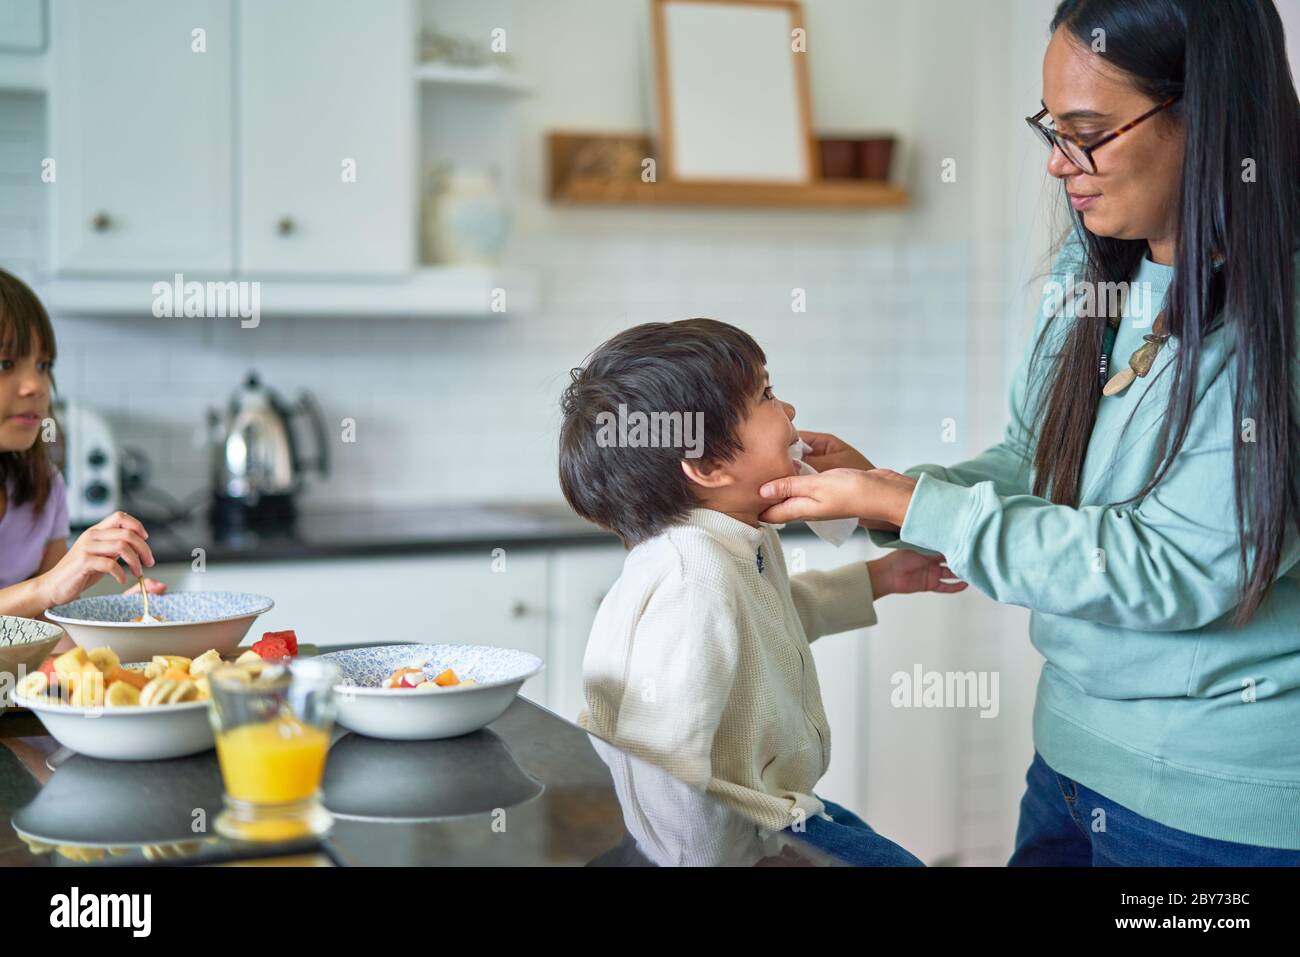 Mother wiping face of son eating fruit in kitchen Stock Photo